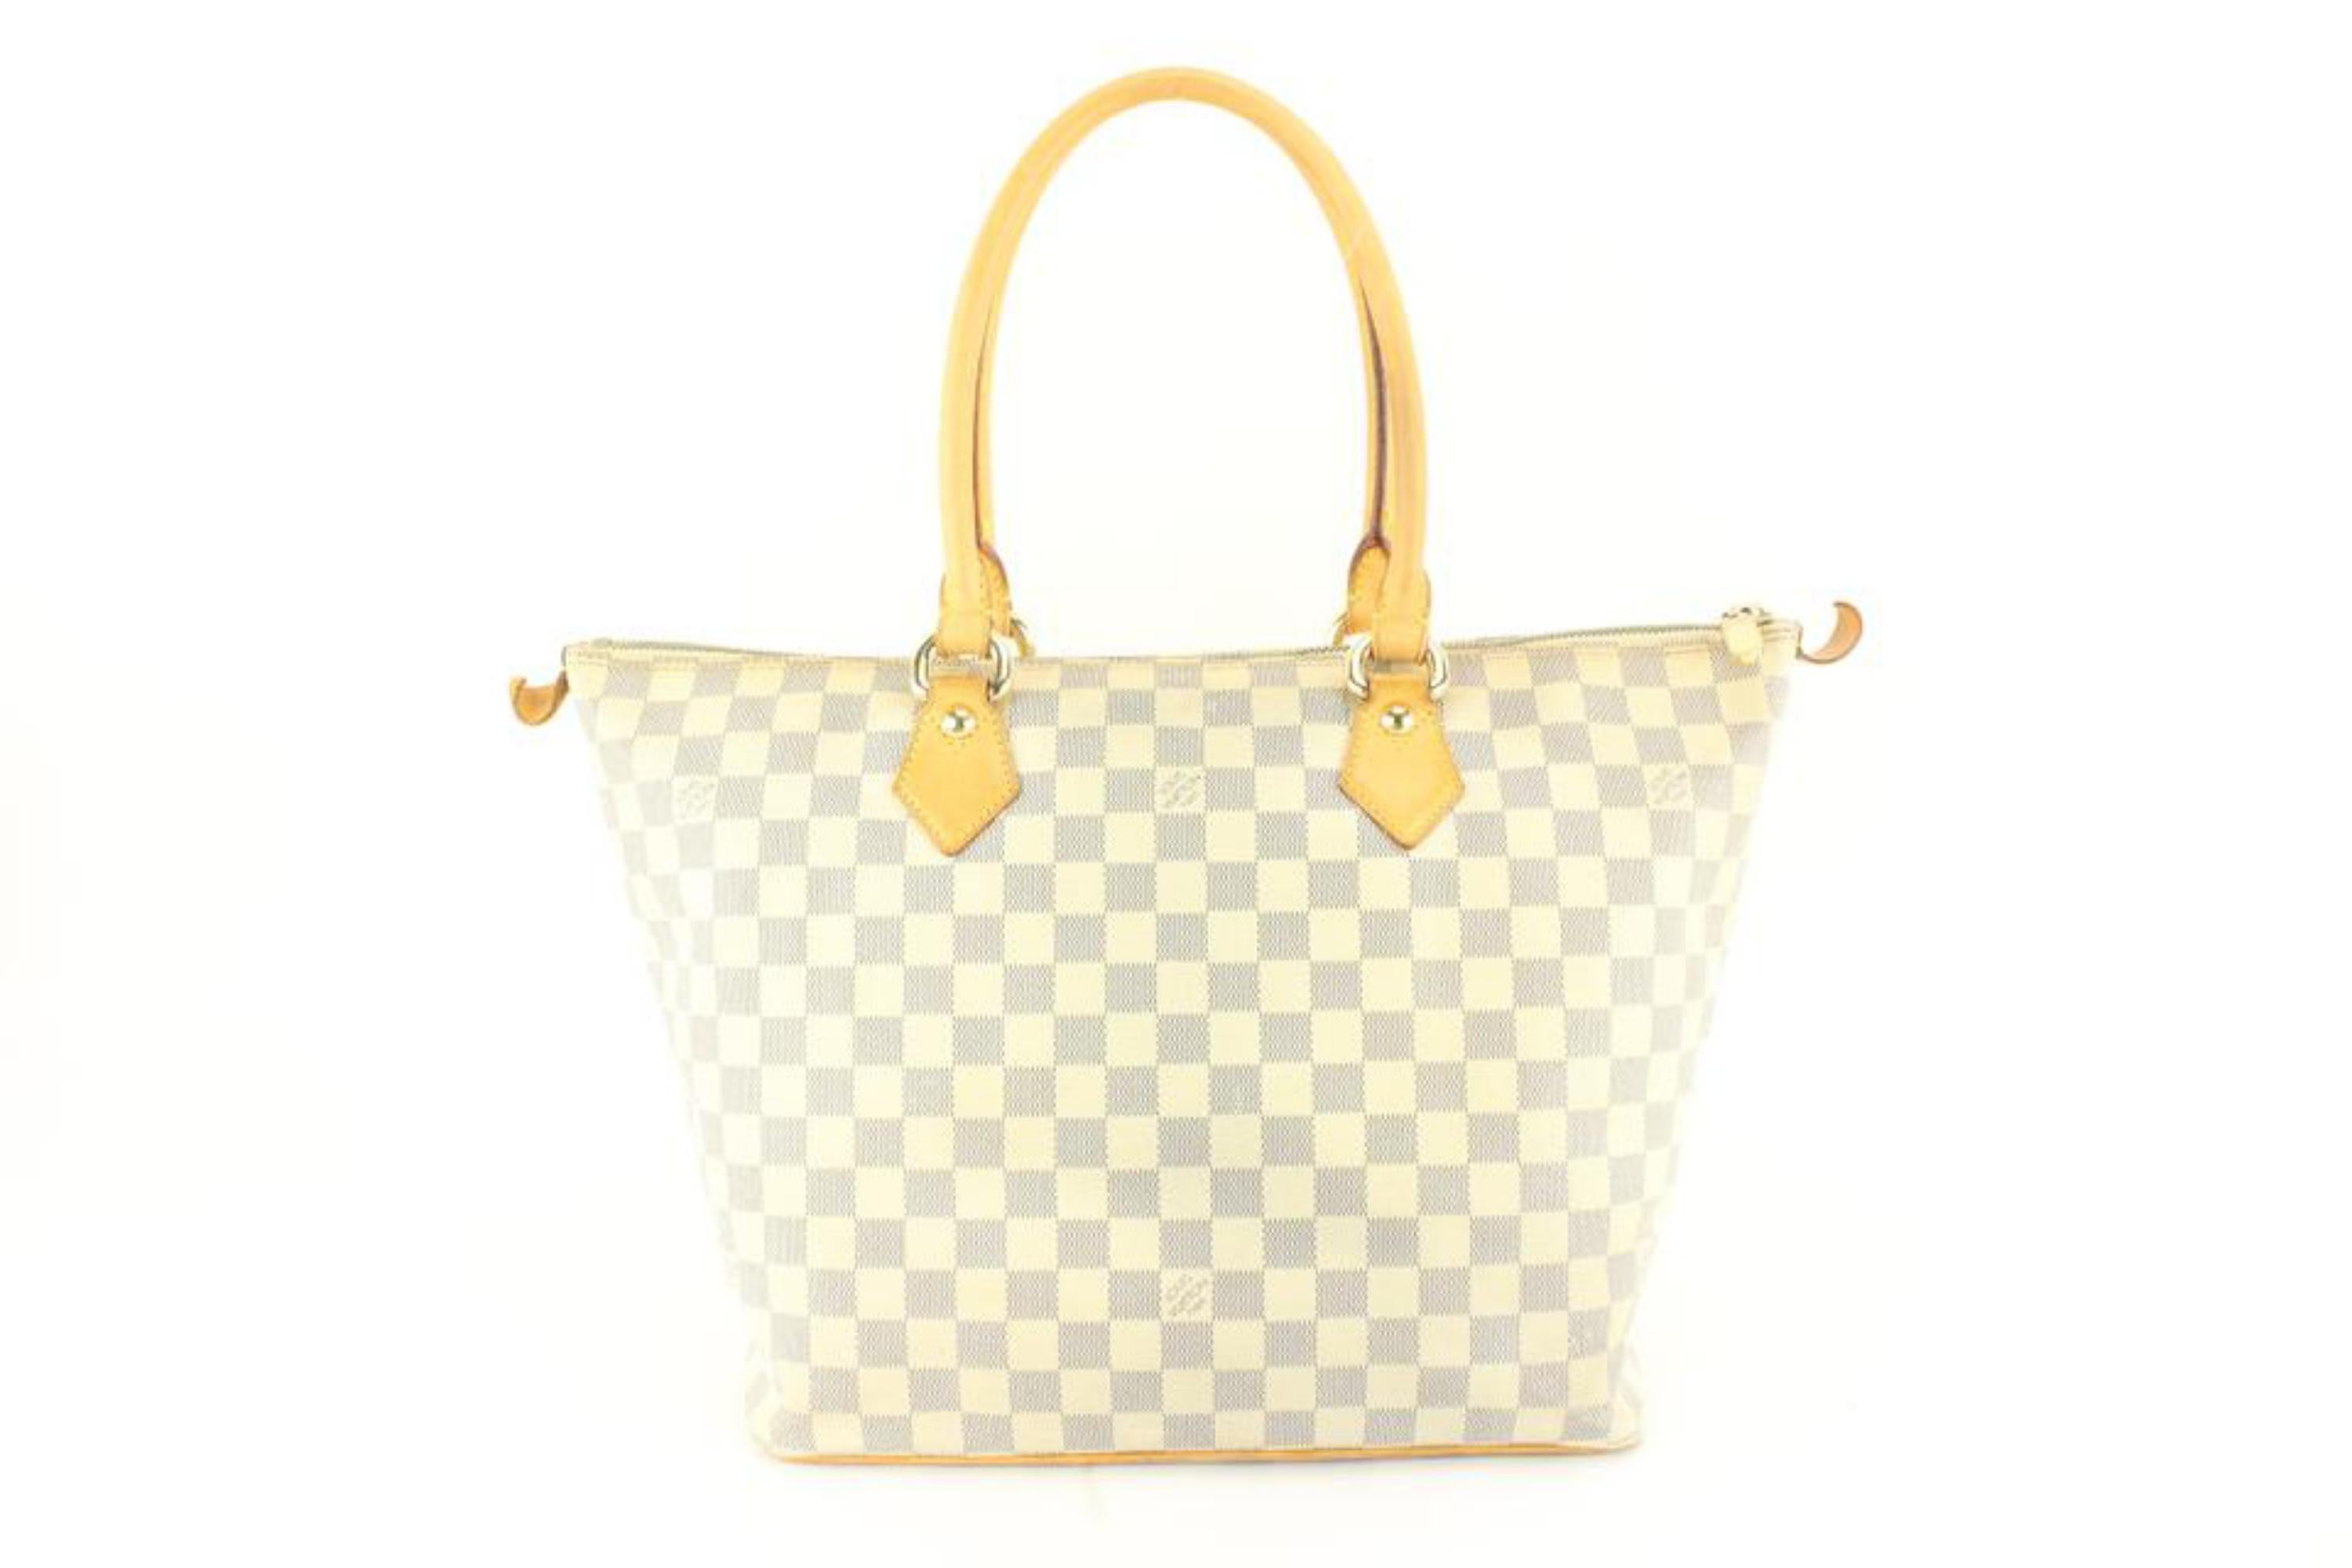 Louis Vuitton Damier Azur Saleya MM Zip Tote Bag 89lk615s In Good Condition For Sale In Dix hills, NY